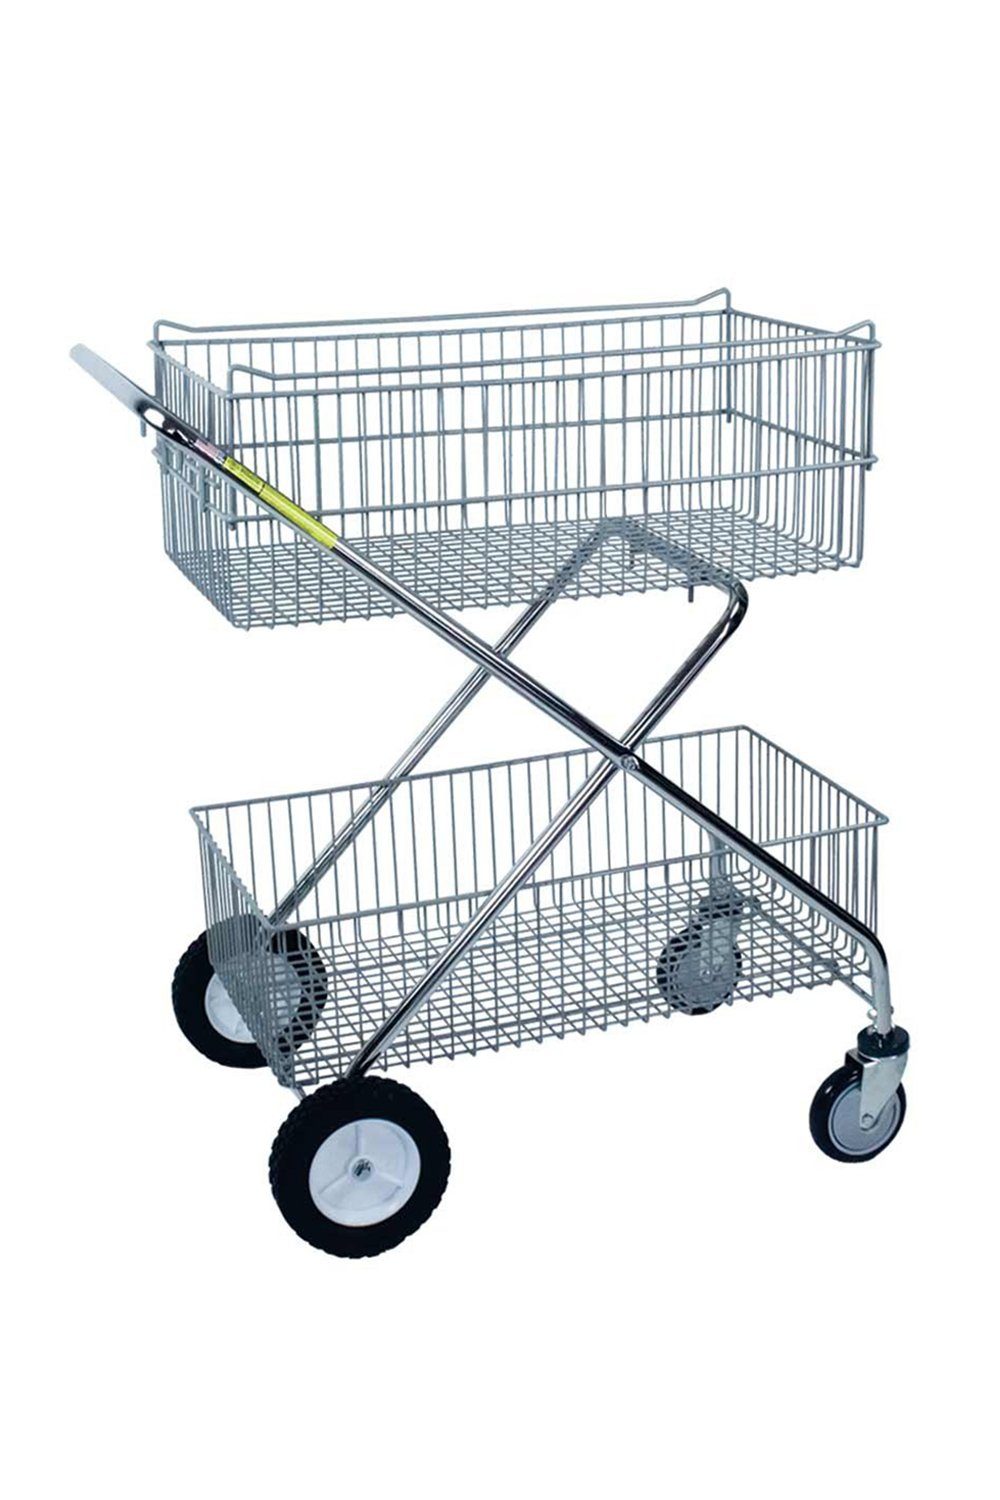 Deluxe Utility Cart Transport & Utility Carts R&B 